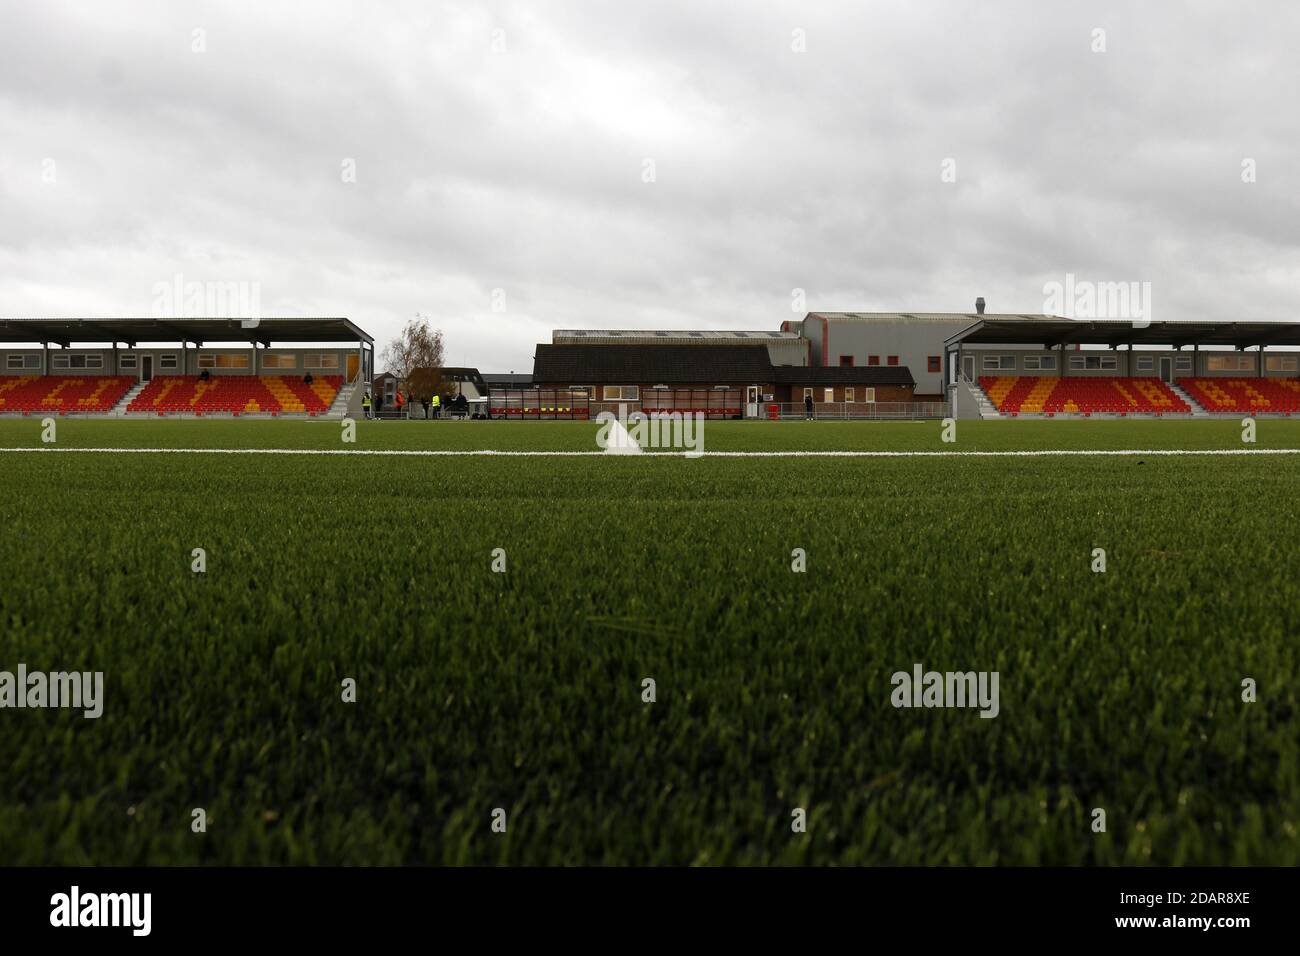 Gloucester, UK. 14th Nov, 2020. General view inside the stadium ahead of the Vanarama National League North game between Gloucester City AFC and Bradford (Park Avenue) AFC at New Meadow Park in Gloucester. Kieran Riley/SSP Credit: SPP Sport Press Photo. /Alamy Live News Stock Photo